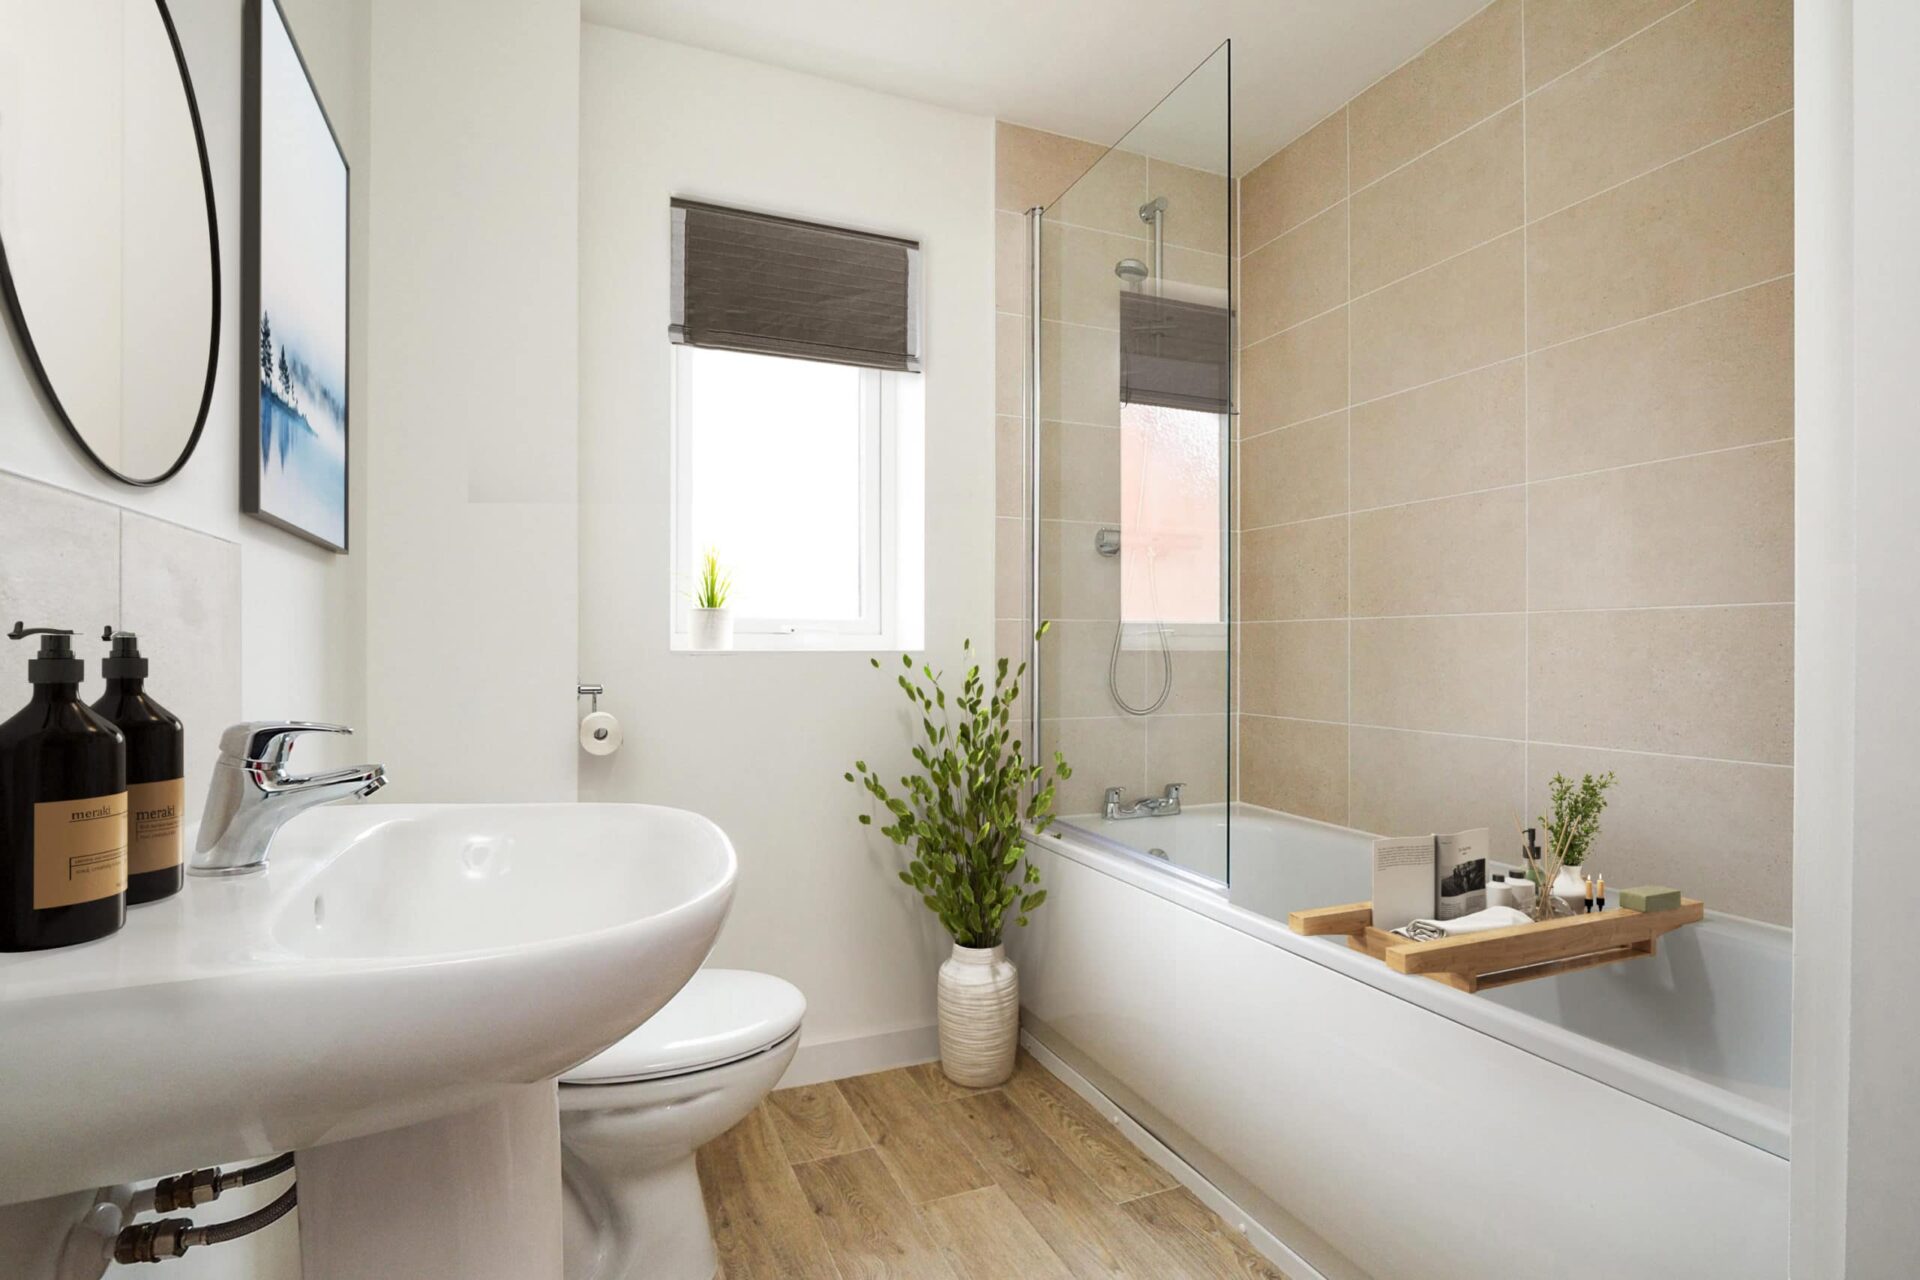 Photo of the bathroom image is a CGI Dressed representation taken in an actual home at Edwalton Park.